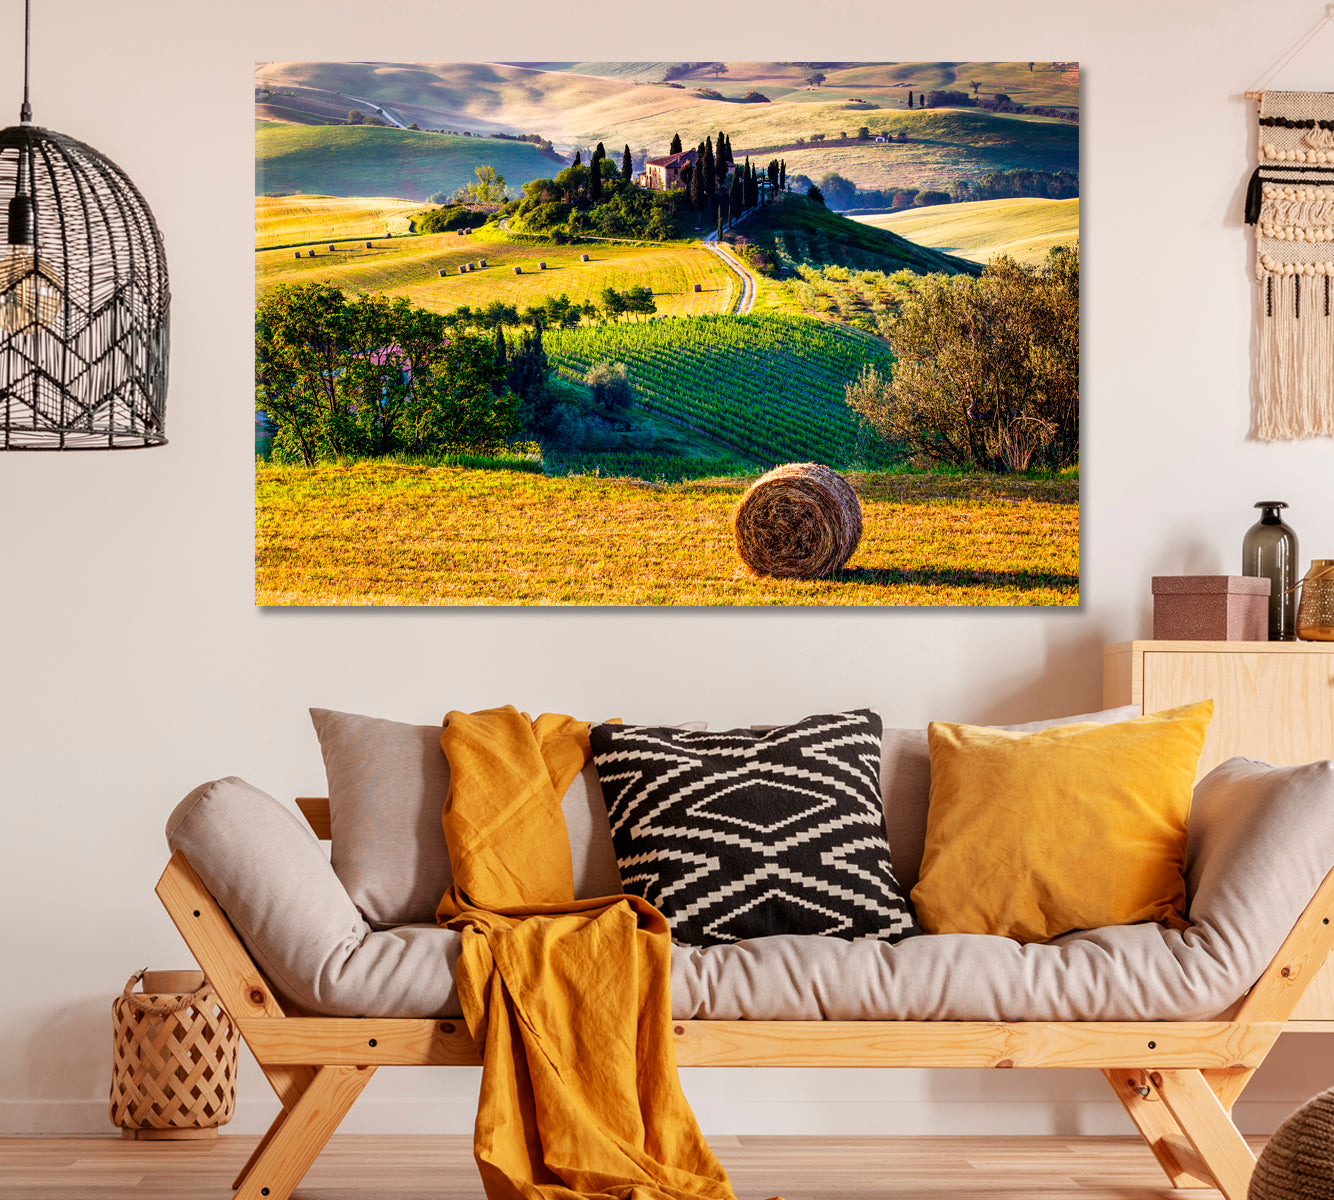 Tuscany Landscape Italy Canvas Print ArtLexy 1 Panel 24"x16" inches 